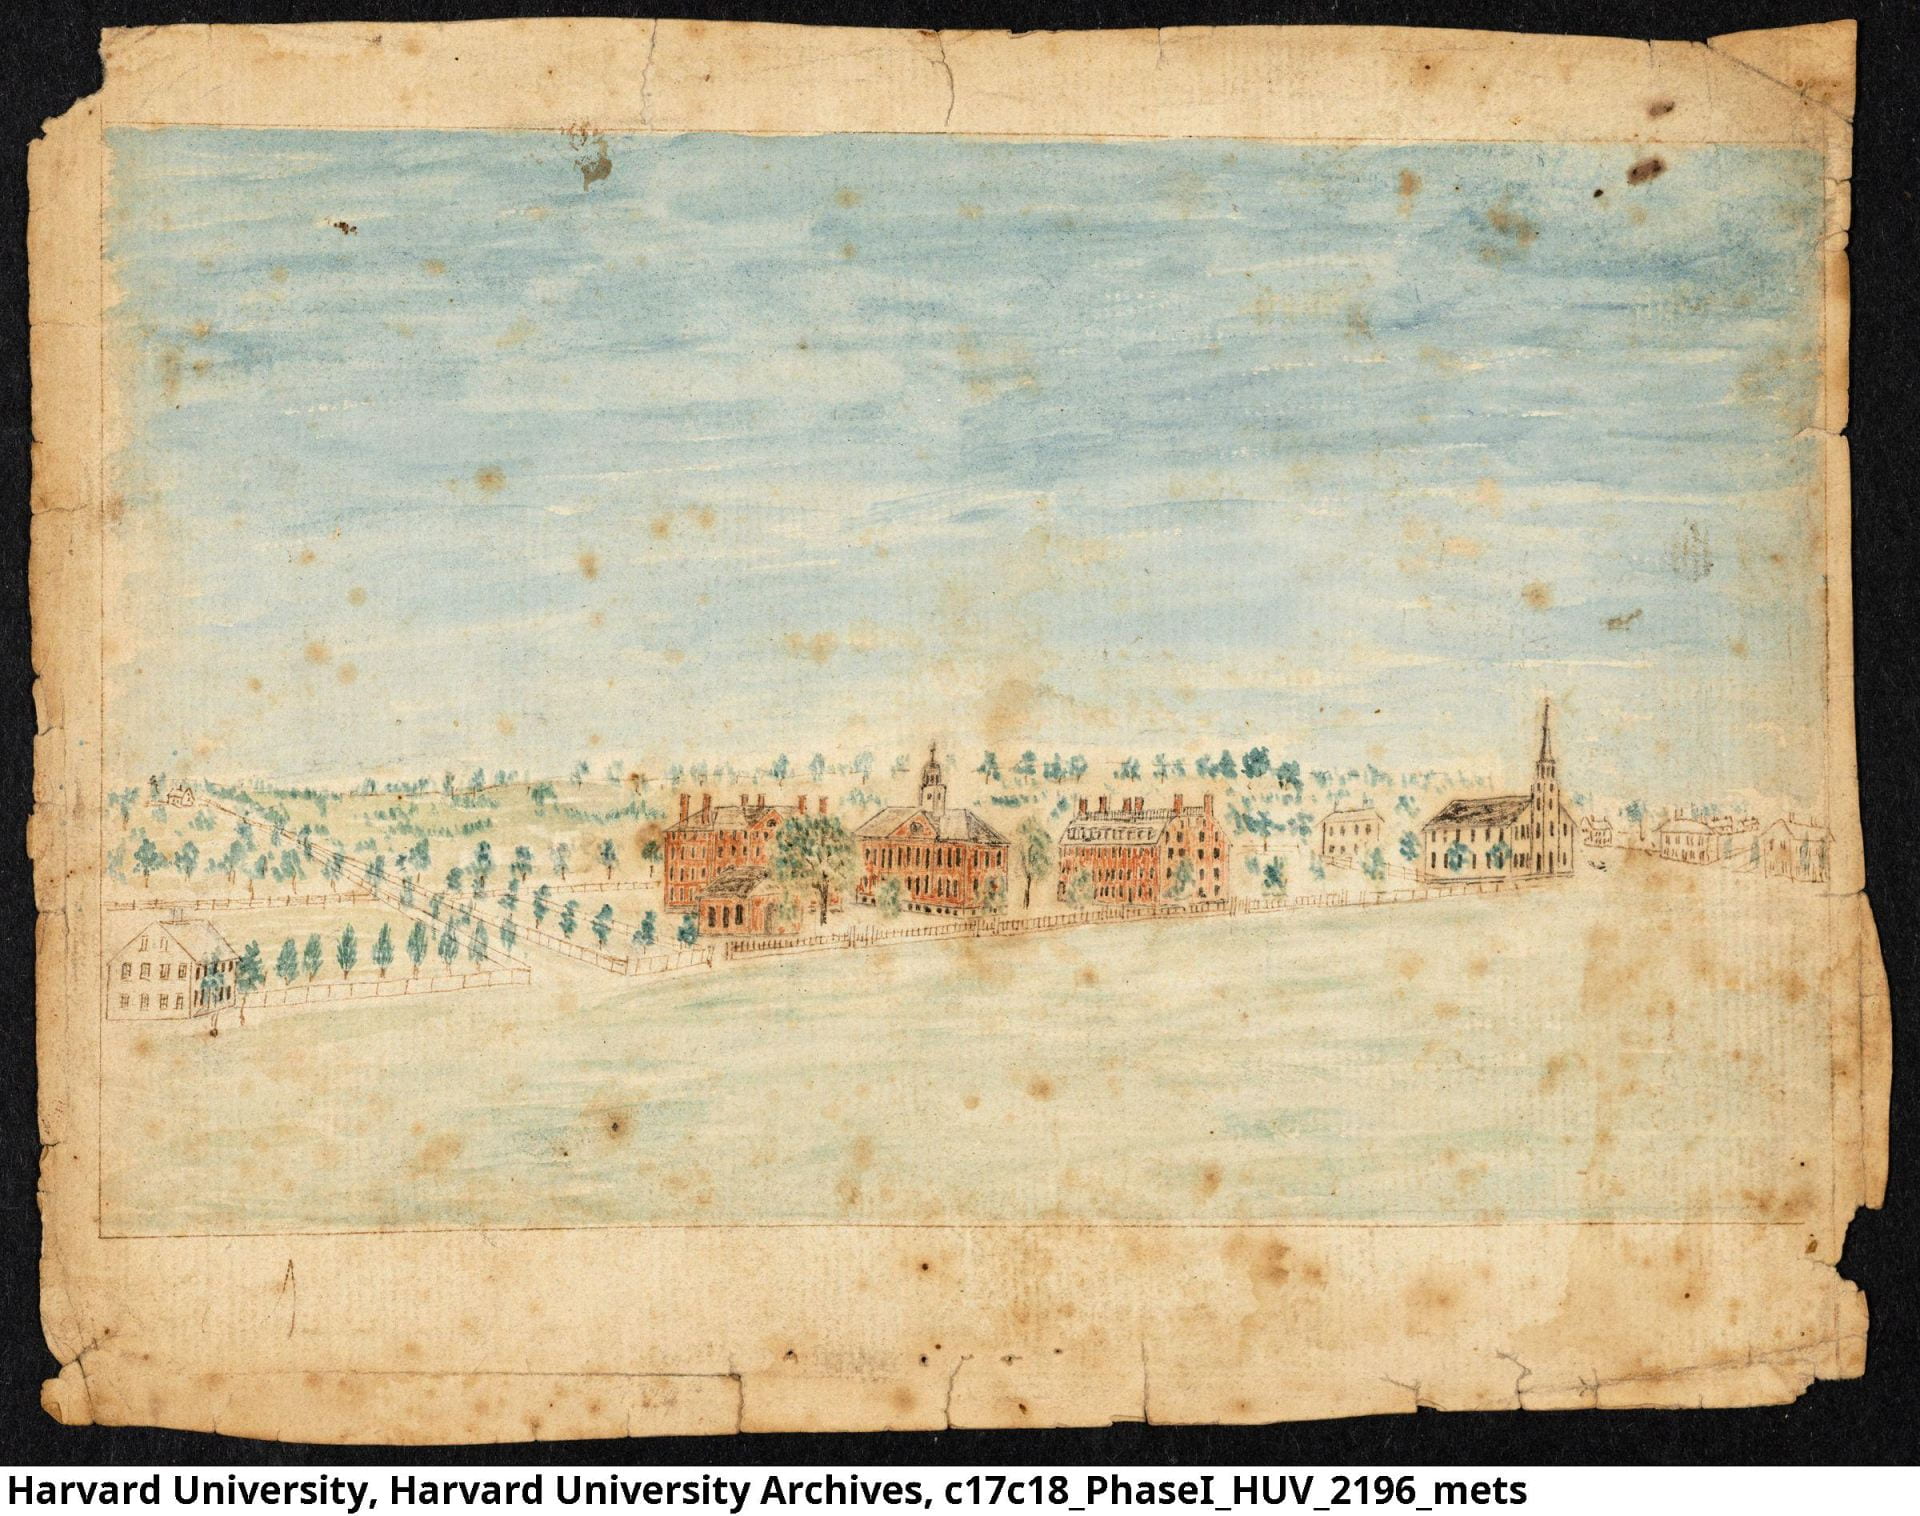 Croswell, Andrew, 1778-1858. A View of Harvard College, 1796. HUV 2196, Harvard University Archives.